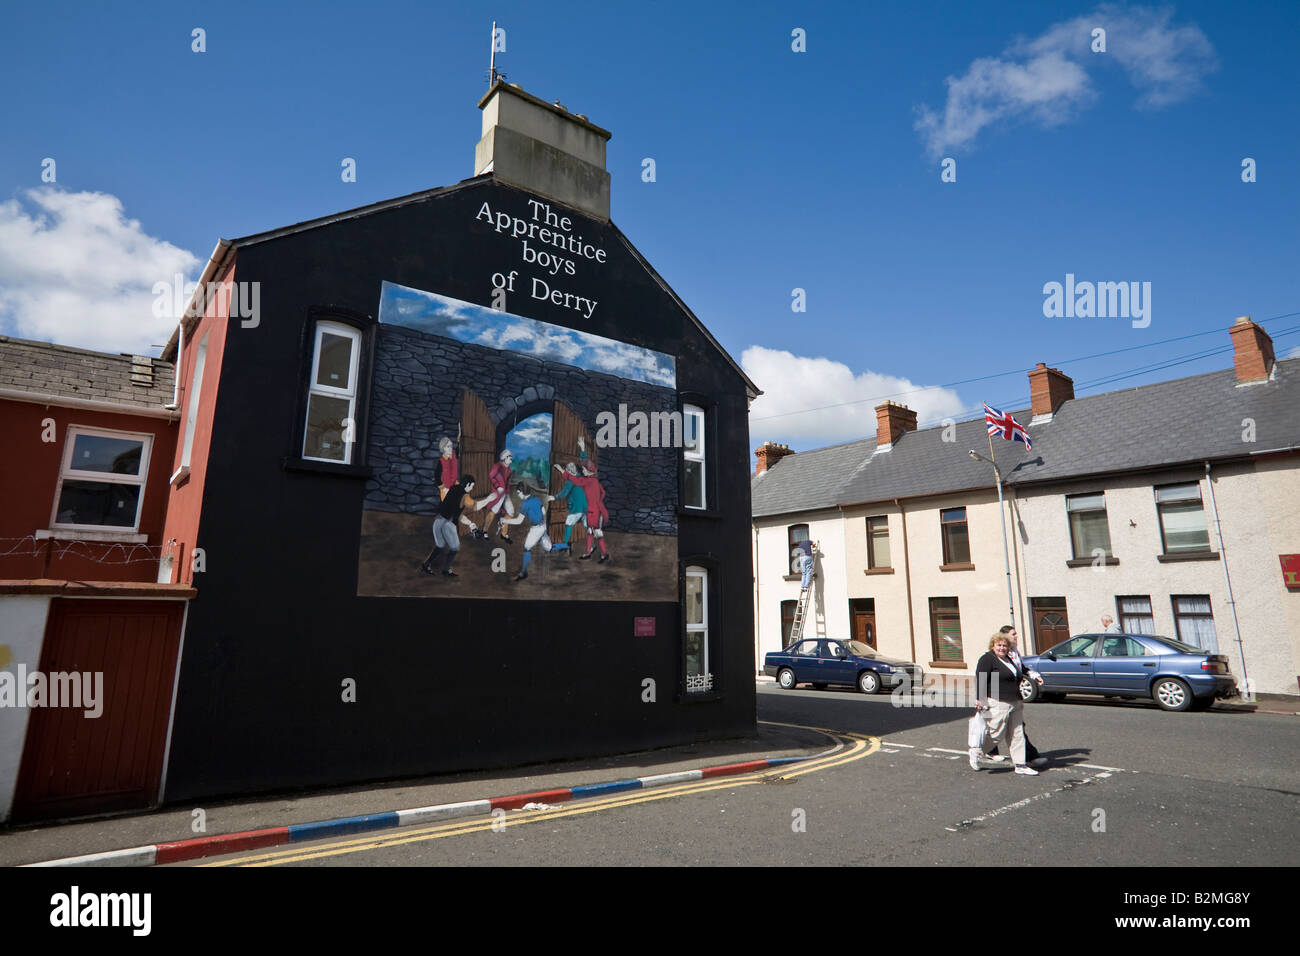 Unionist mural of the Apprentice Boys of Derry, Emerson Street, off Bond's Street, Waterside, Londonderry, Northern Ireland Stock Photo